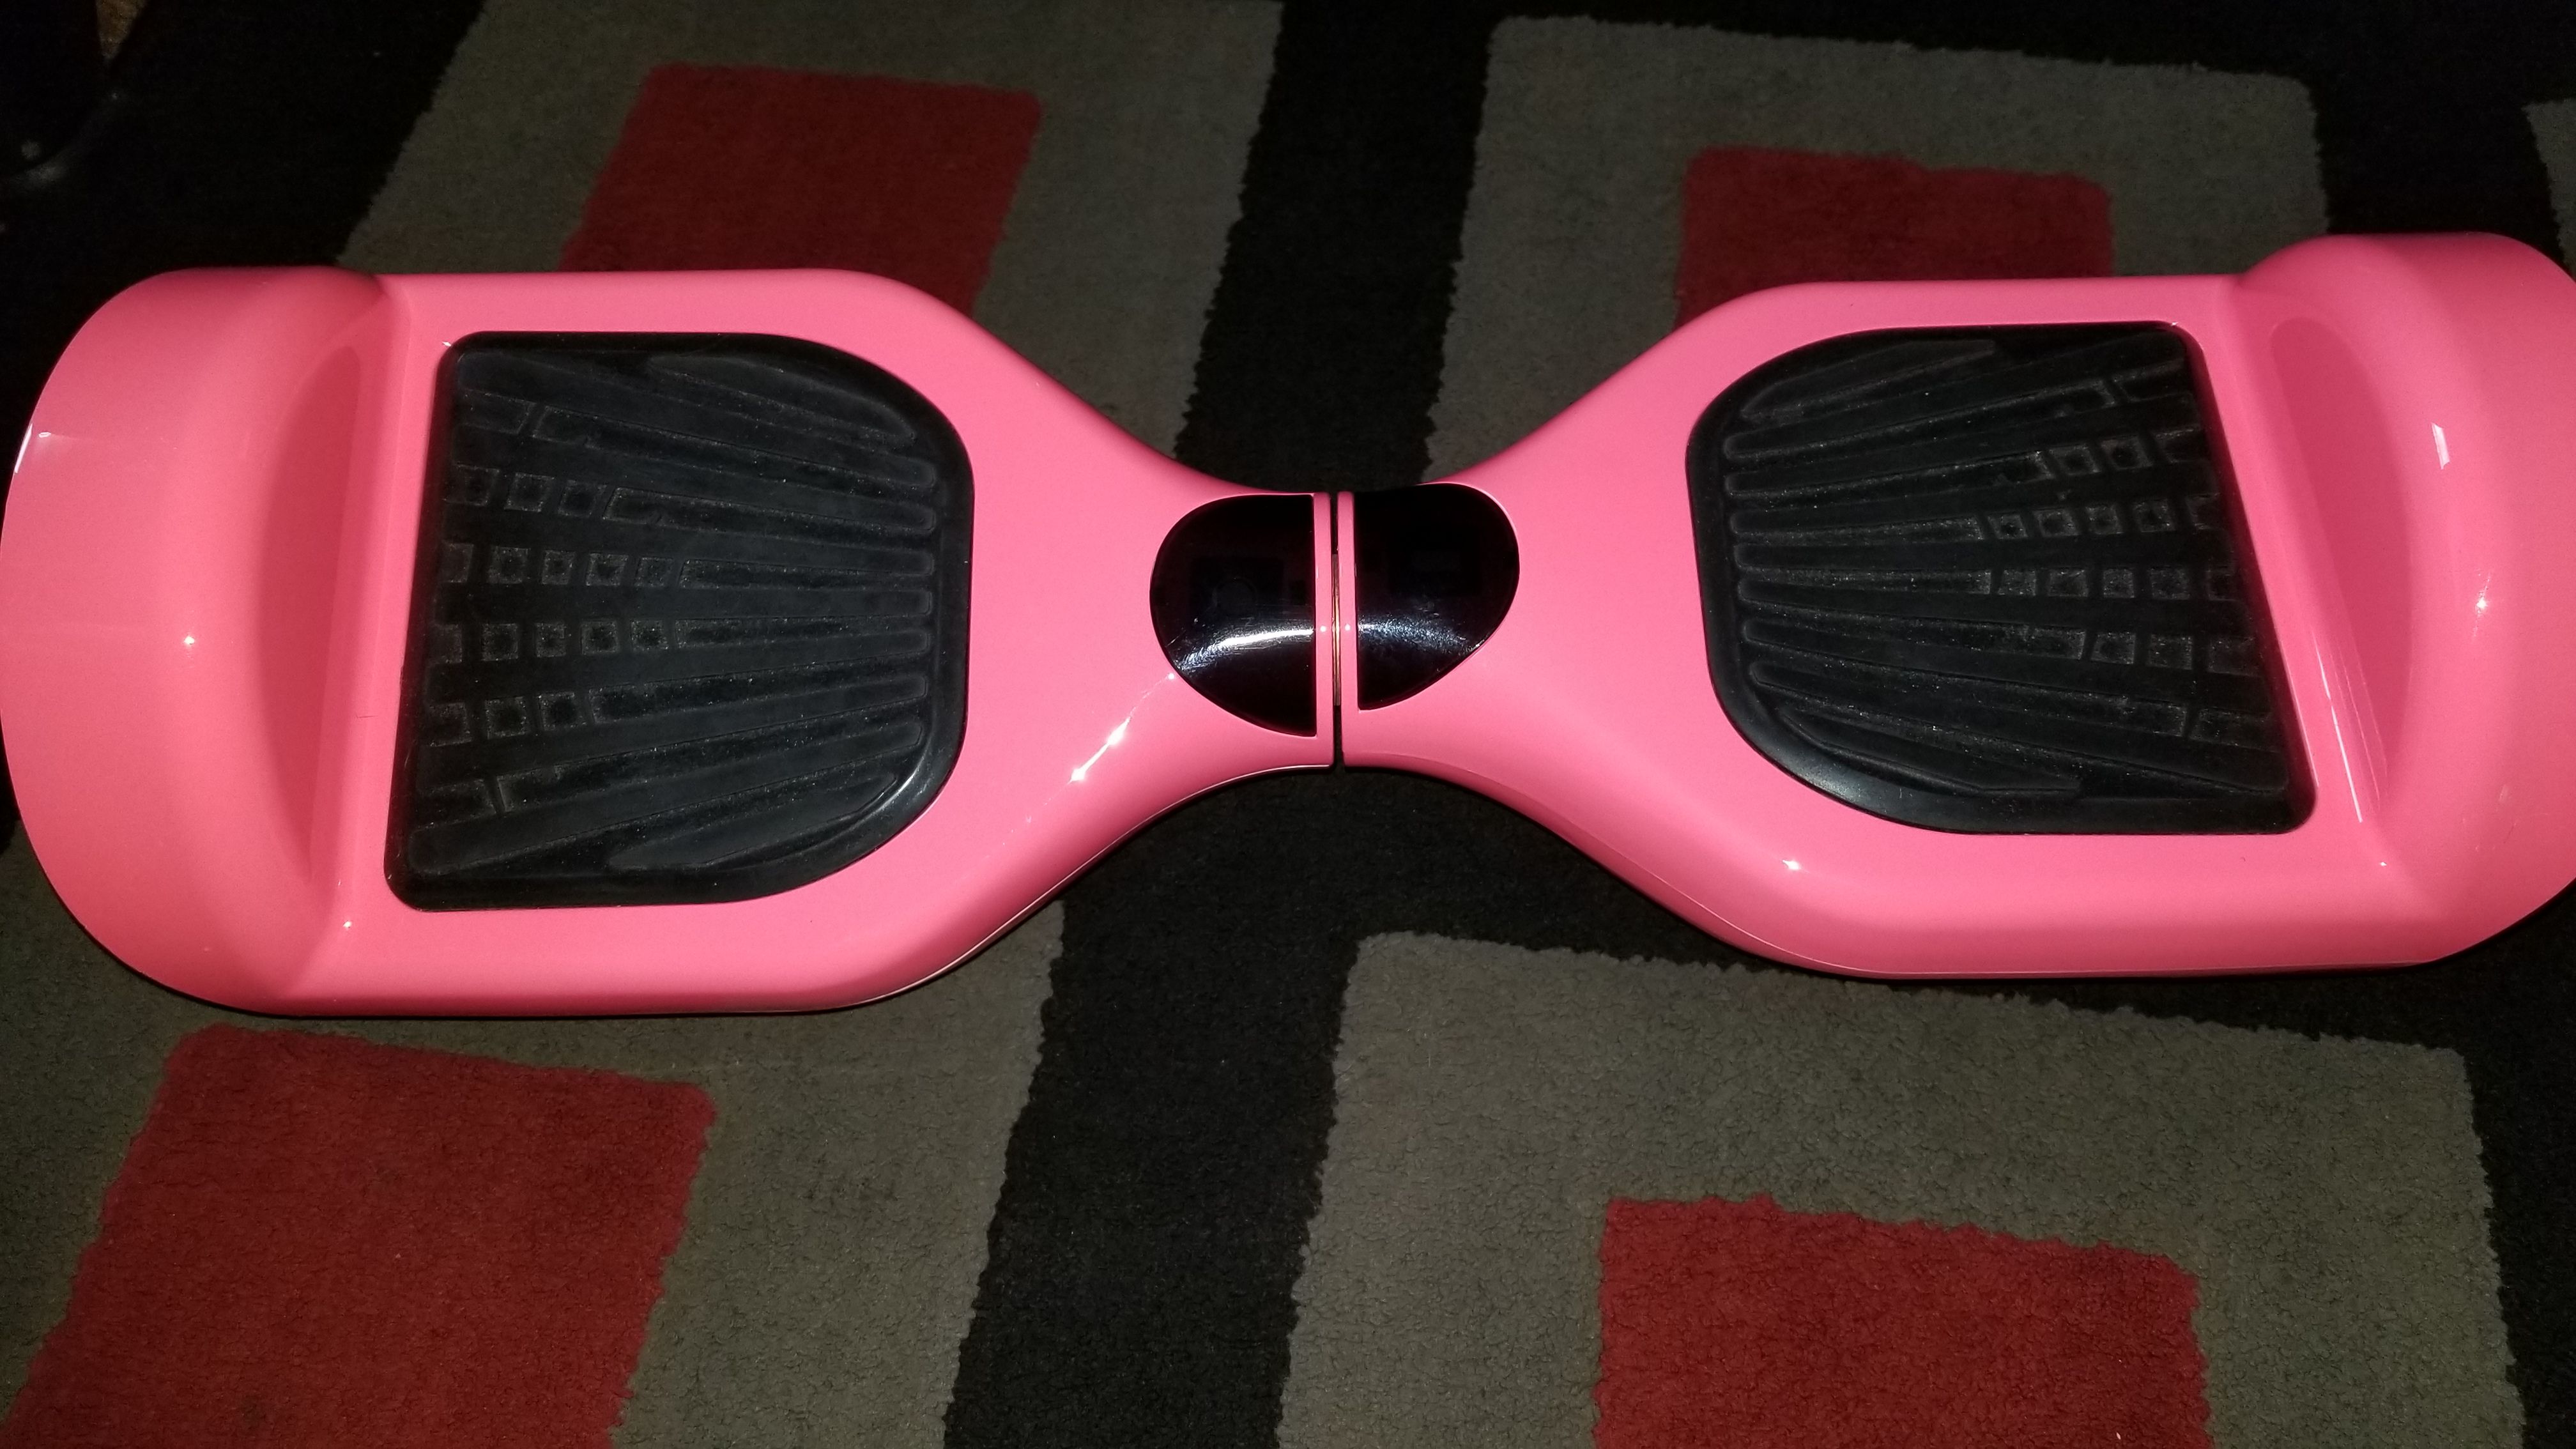 Hot pink hover board